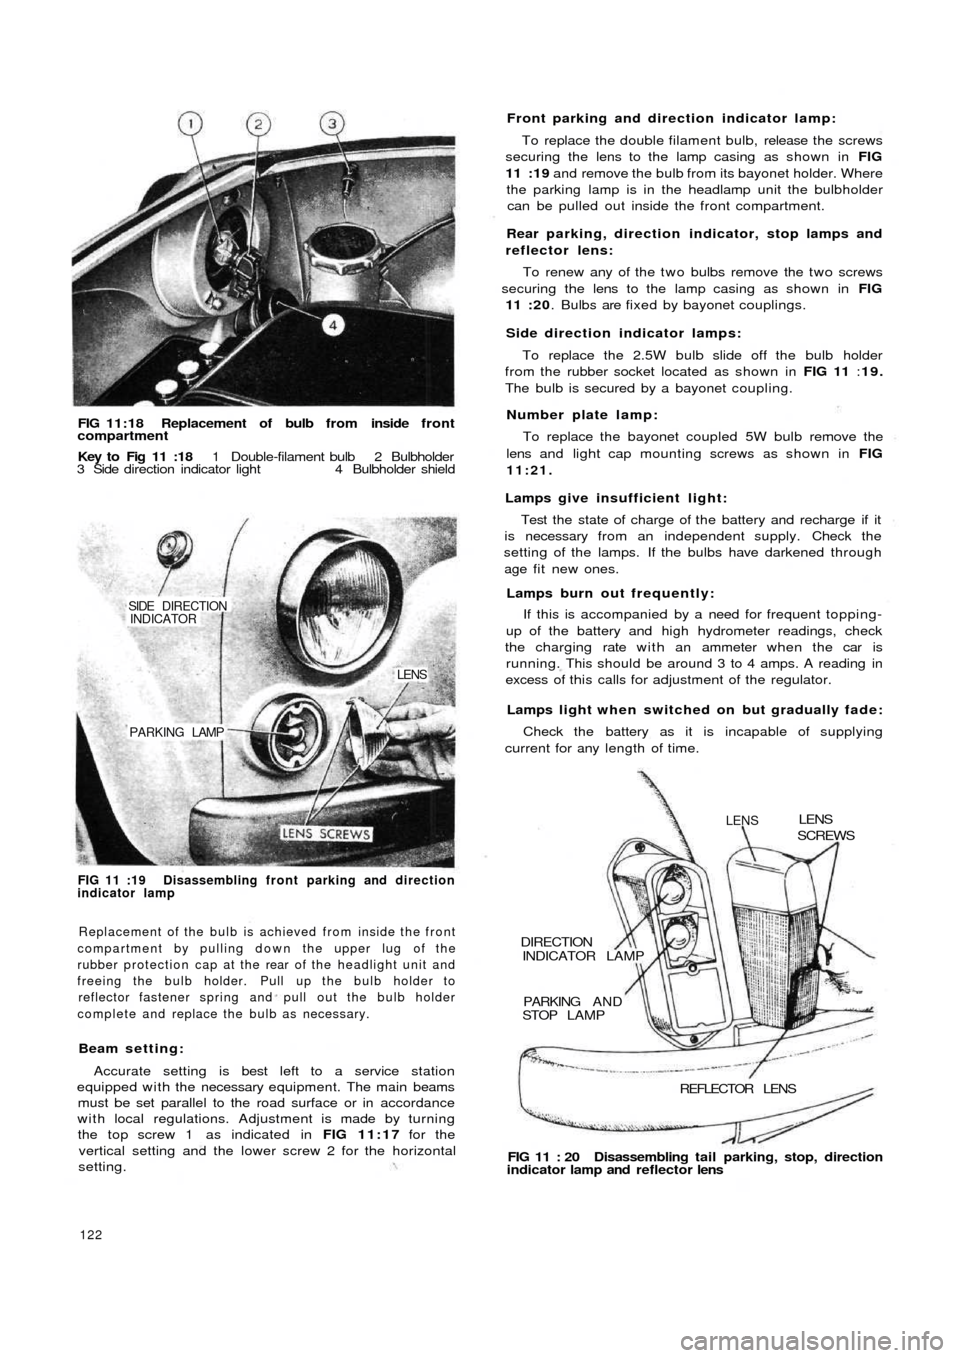 FIAT 500 1957 1.G Workshop Manual FIG 11:18 Replacement of bulb from inside f r o n tcompartment
Key to  Fig 11 :18 1 Double-filament bulb 2 Bulbholder
3 Side direction indicator light 4 Bulbholder shield
PARKING LAMP
LENS
SIDE  DIREC